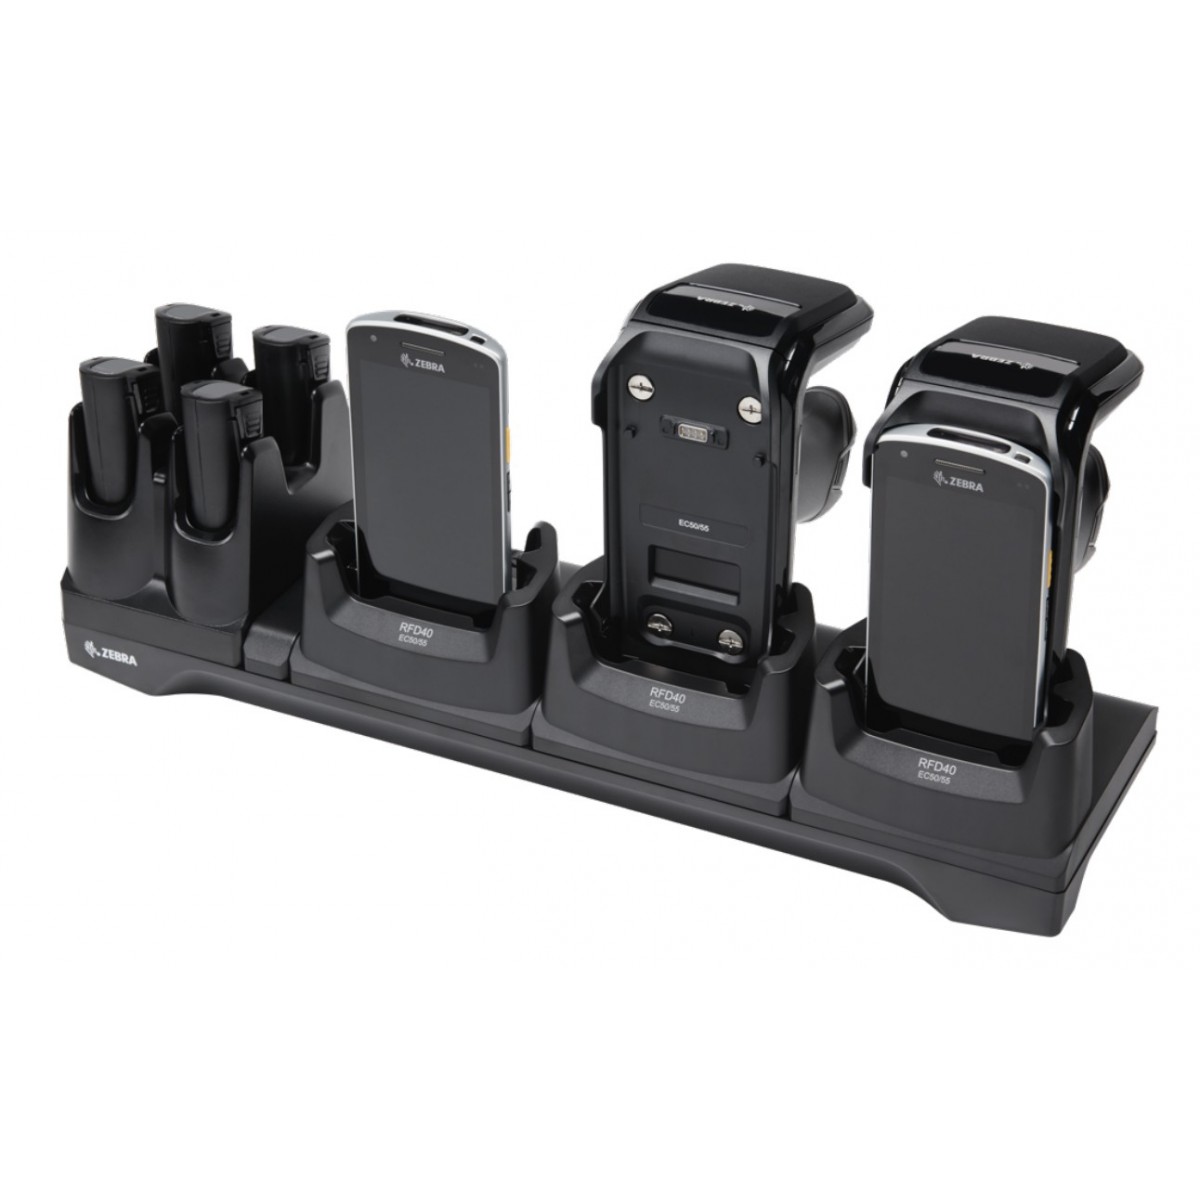 Zebra RFD40 3 DEVICE SLOTS-4 TOASTER SLOTS CHARGE ONLY CRADLE WITH SUPPORT FOR EC50-55